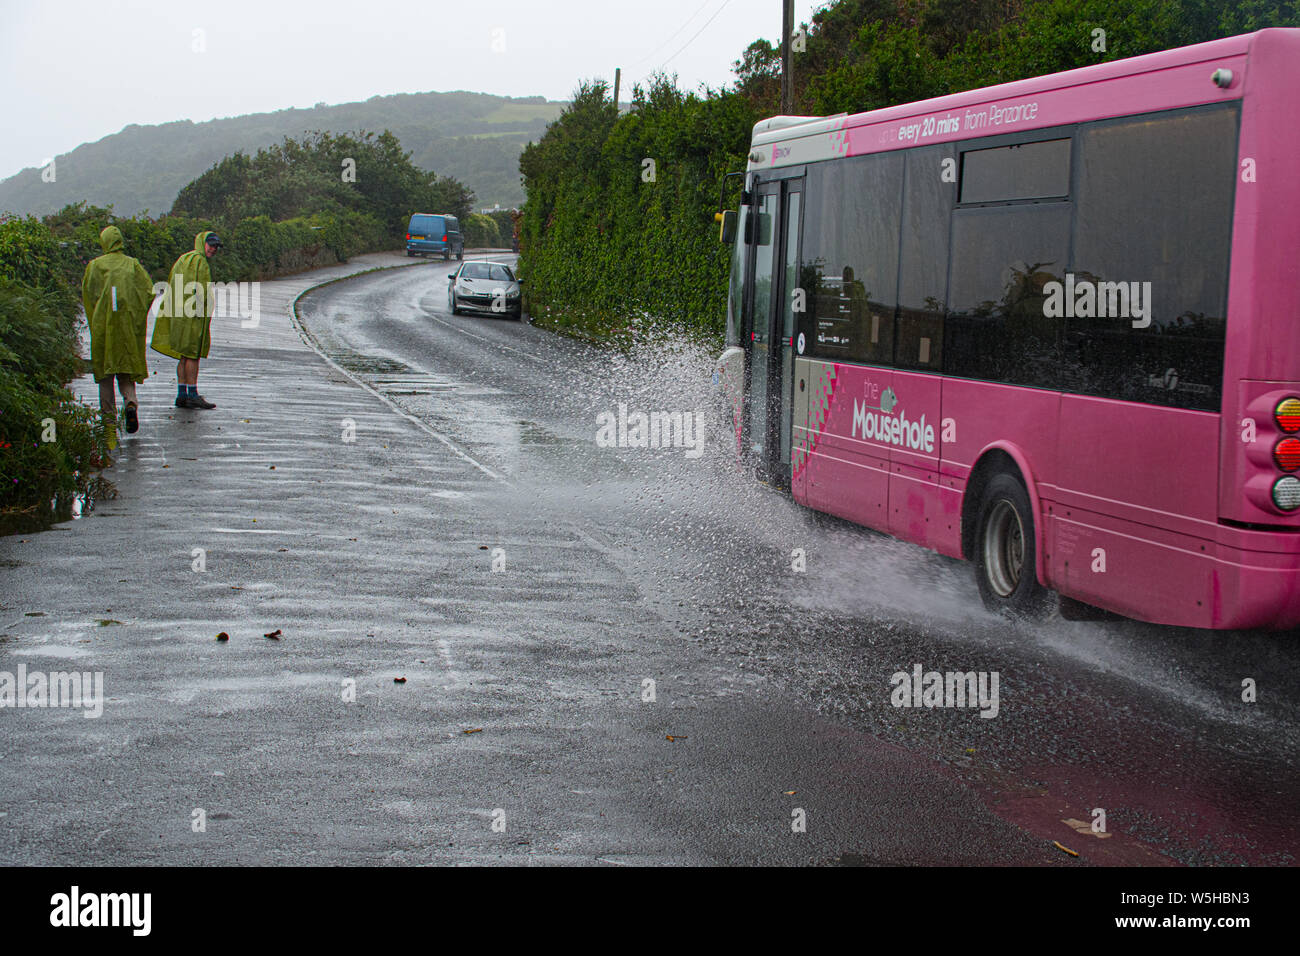 Mousehole, Cornwall, UK. 29th July 2019. UK Weather. Today is national 'Rain Day', and the weather didn't dissapoint at Mousehole, Cornwall, with heavy downpours throughout the day. Credit Simon Maycock / Alamy Live News. Stock Photo